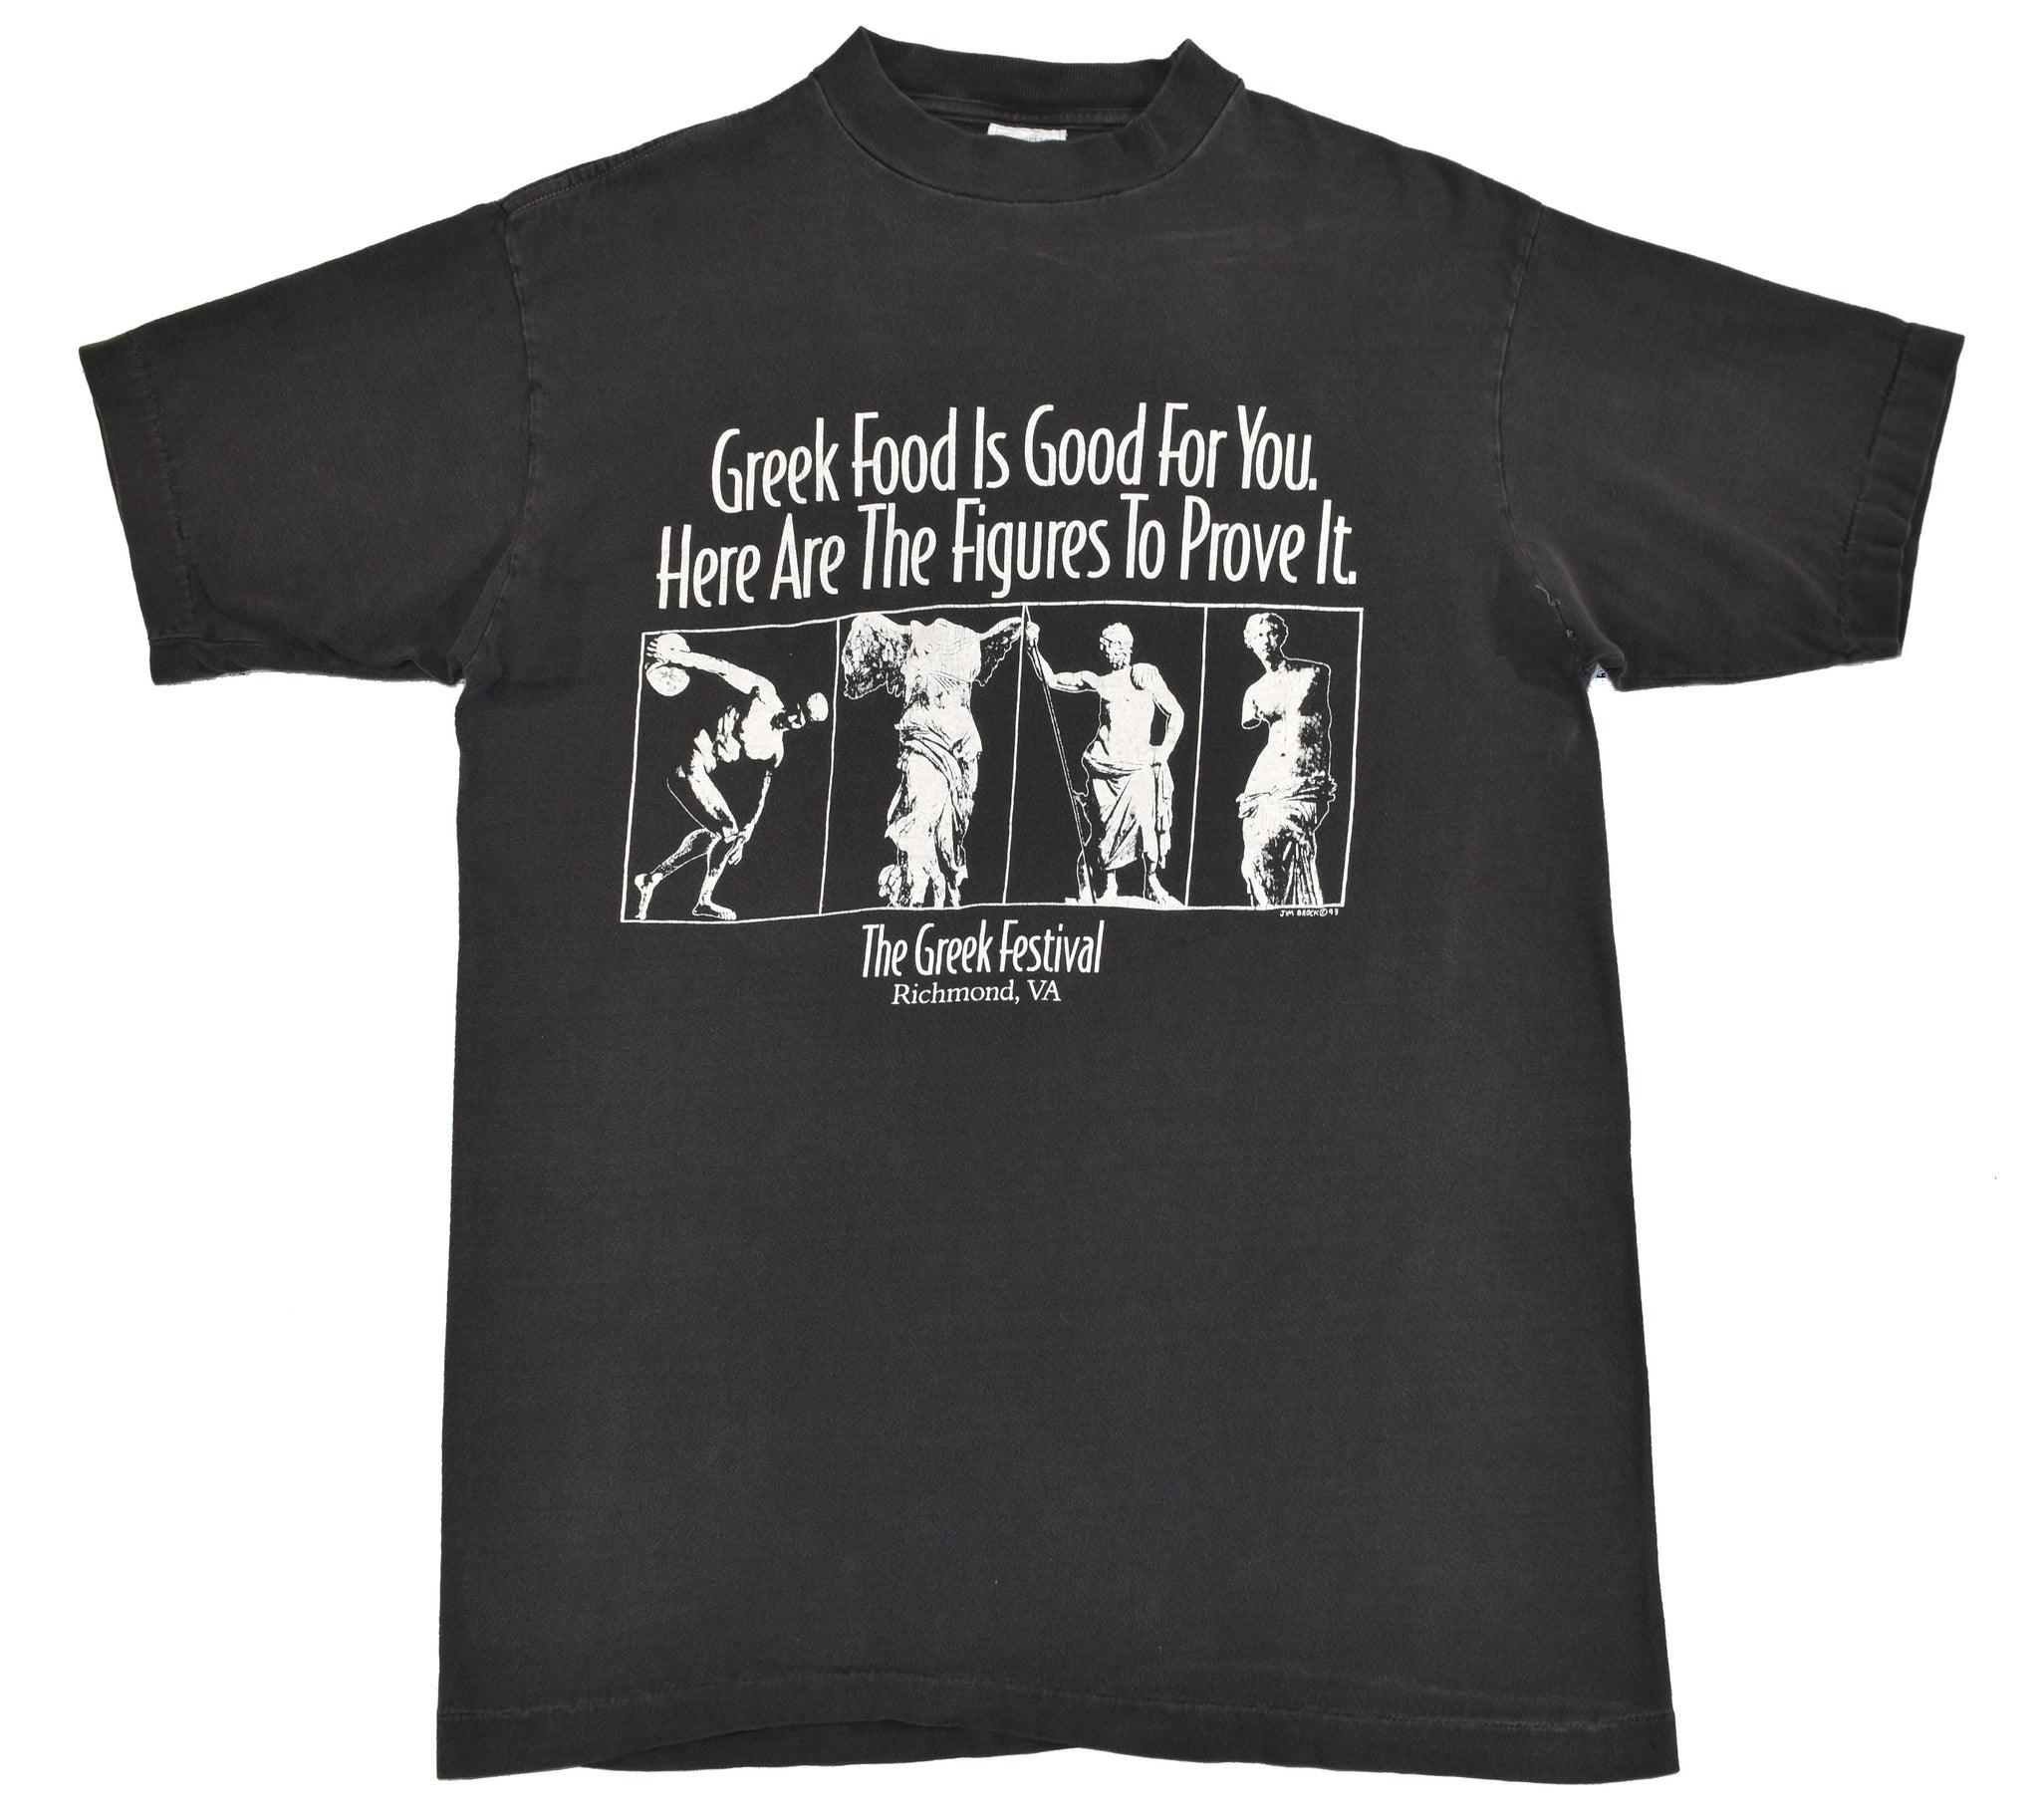 1993 Greek Food Is Good For You Single Stitch Shirt Size Large